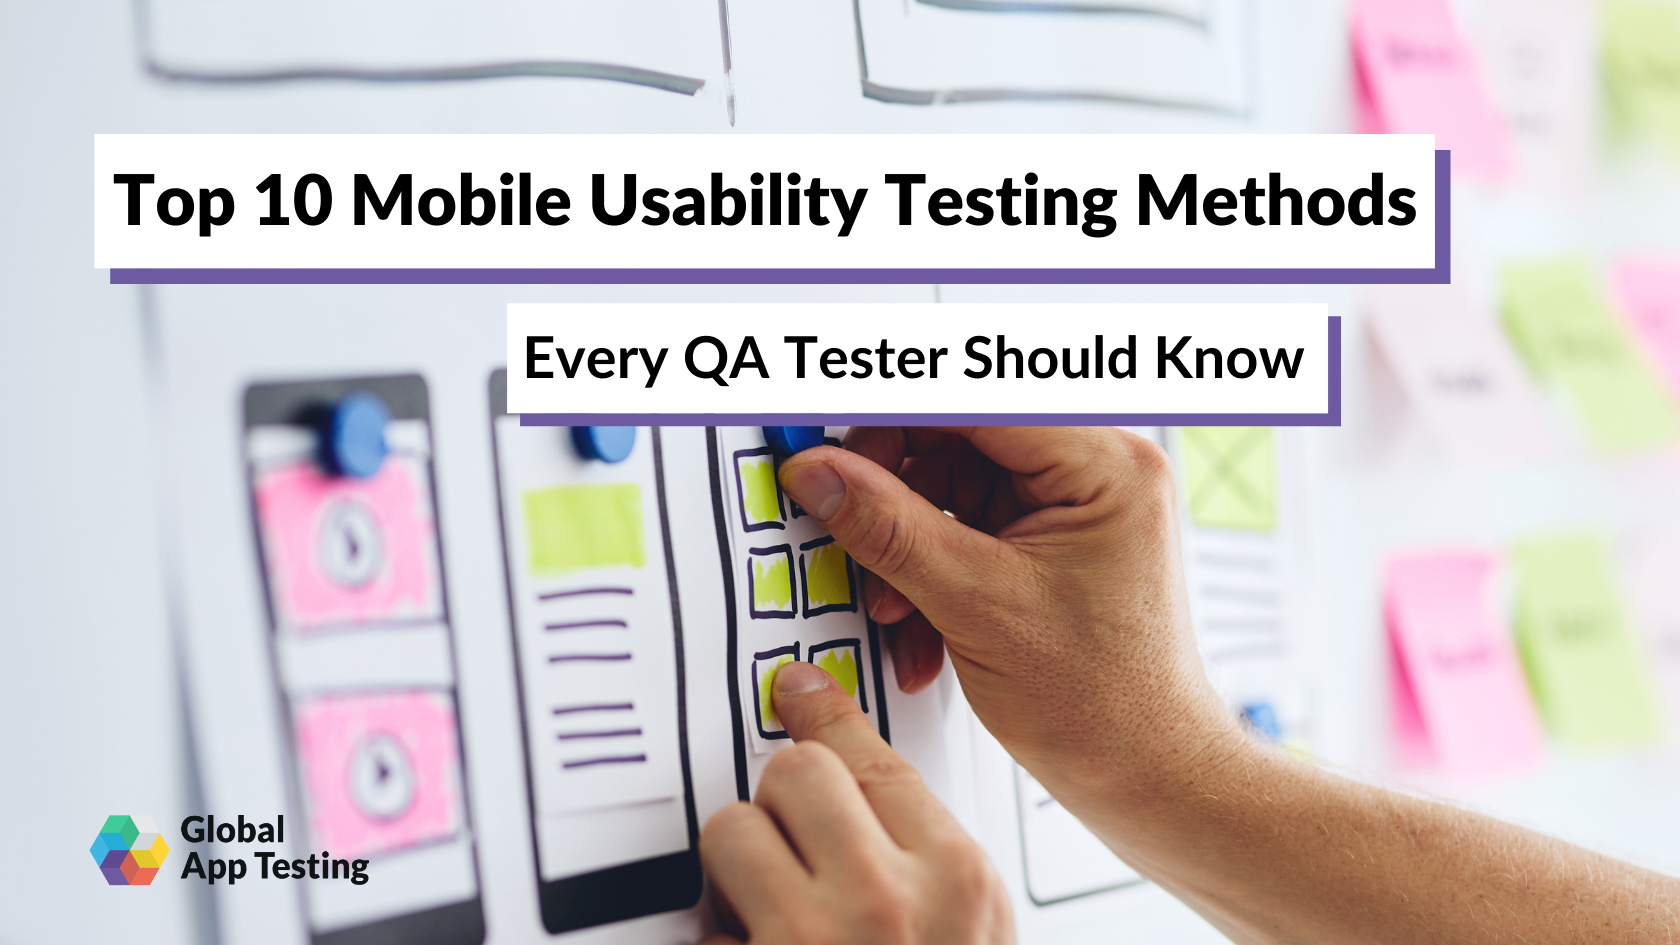 Top 10 Mobile Usability Testing Methods Every QA Tester Should Know